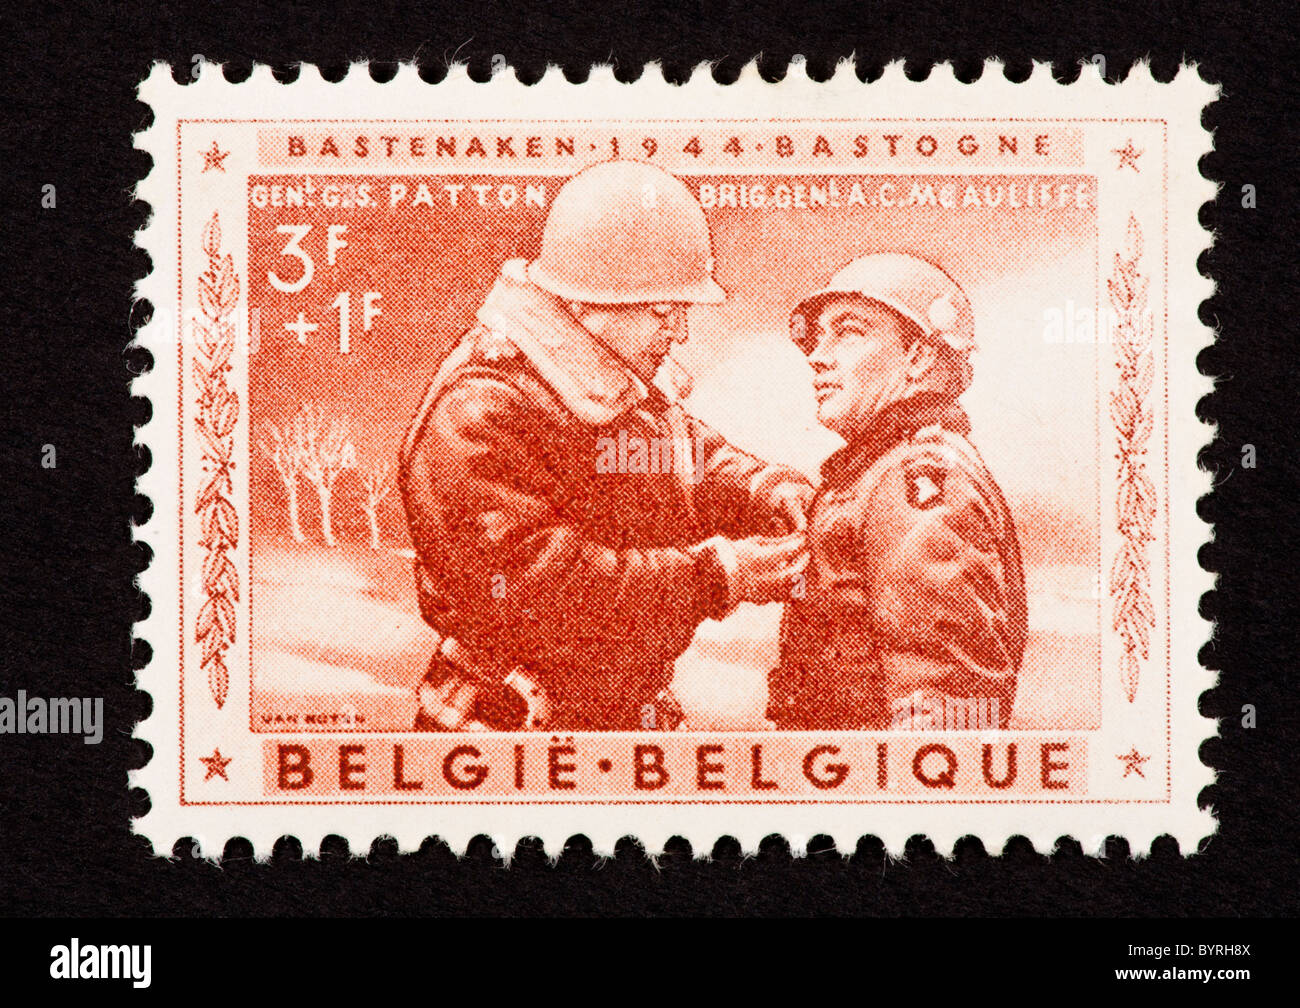 Postage stamp from Belgium depicting Patton pinning a medal on a soldier. Stock Photo